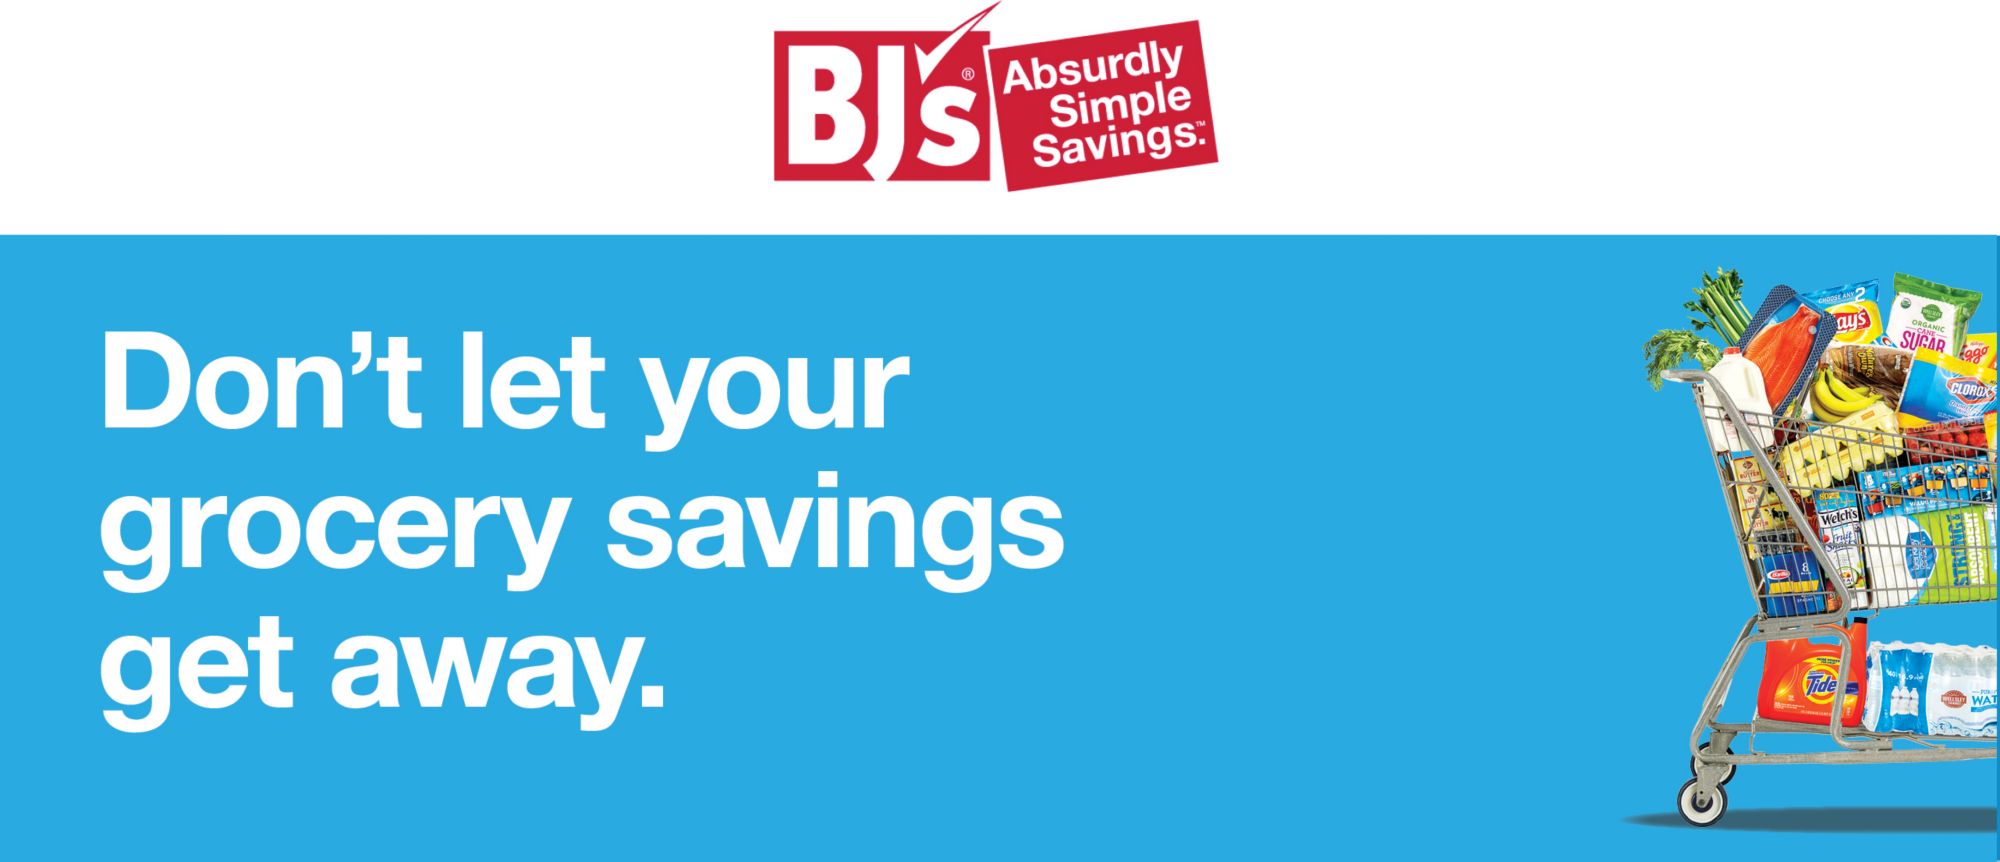 BJ's Absurdly Simple Savings. Join now for just $25. that's over 50% off! (Reg. $55). 1-year BJ's Inner Circle or Business Membership. New members only.